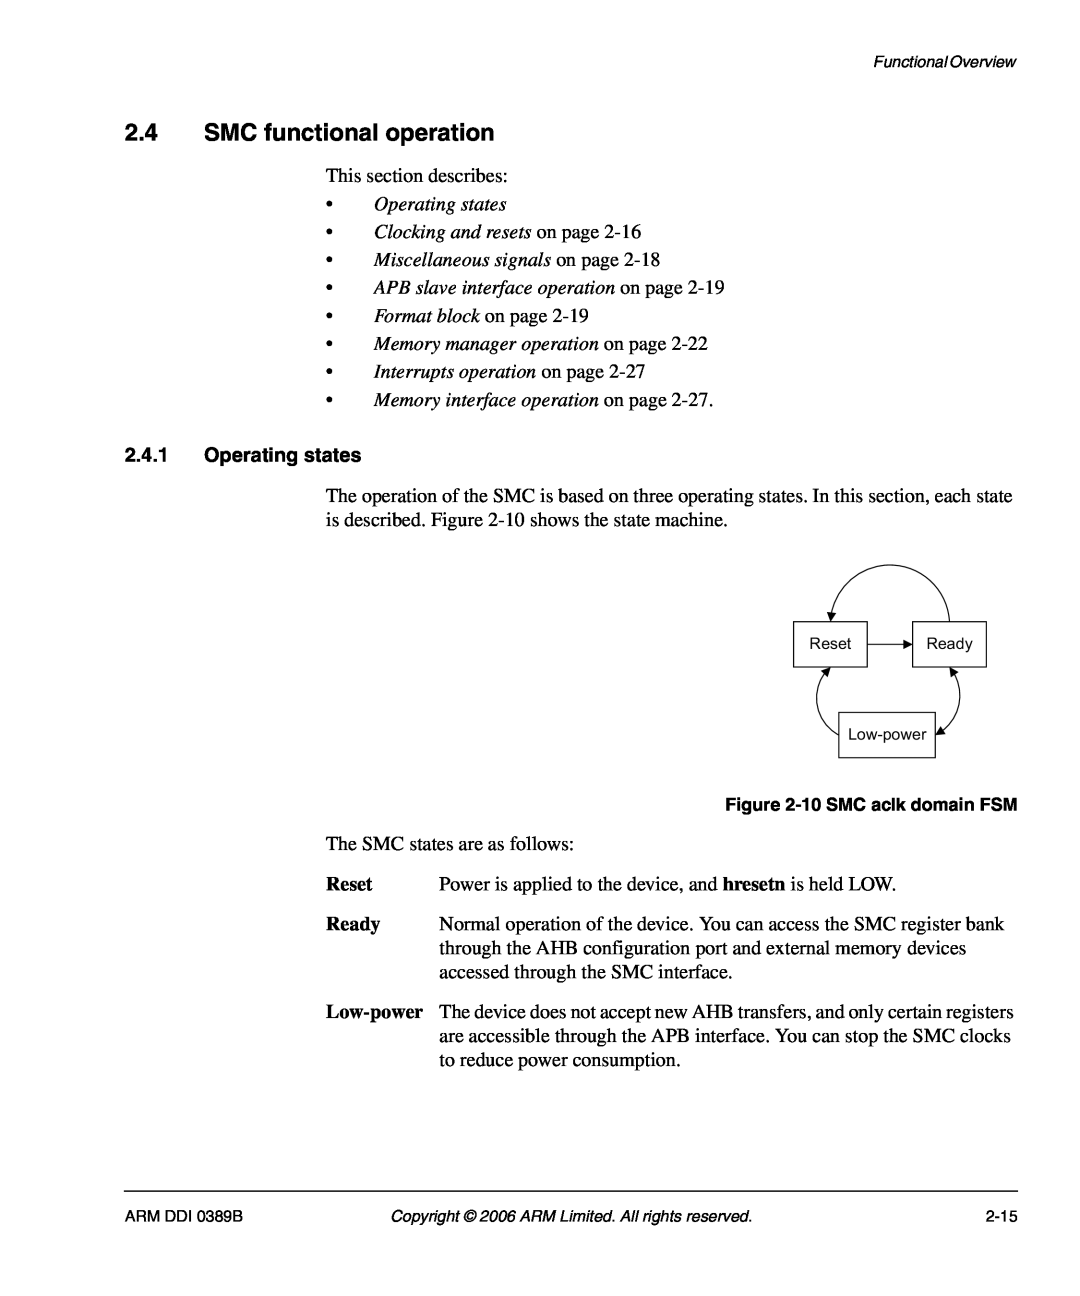 SMC Networks AHB SRAM/NOR, PL241 manual SMC functional operation, Operating states Clocking and resets on page, Reset 